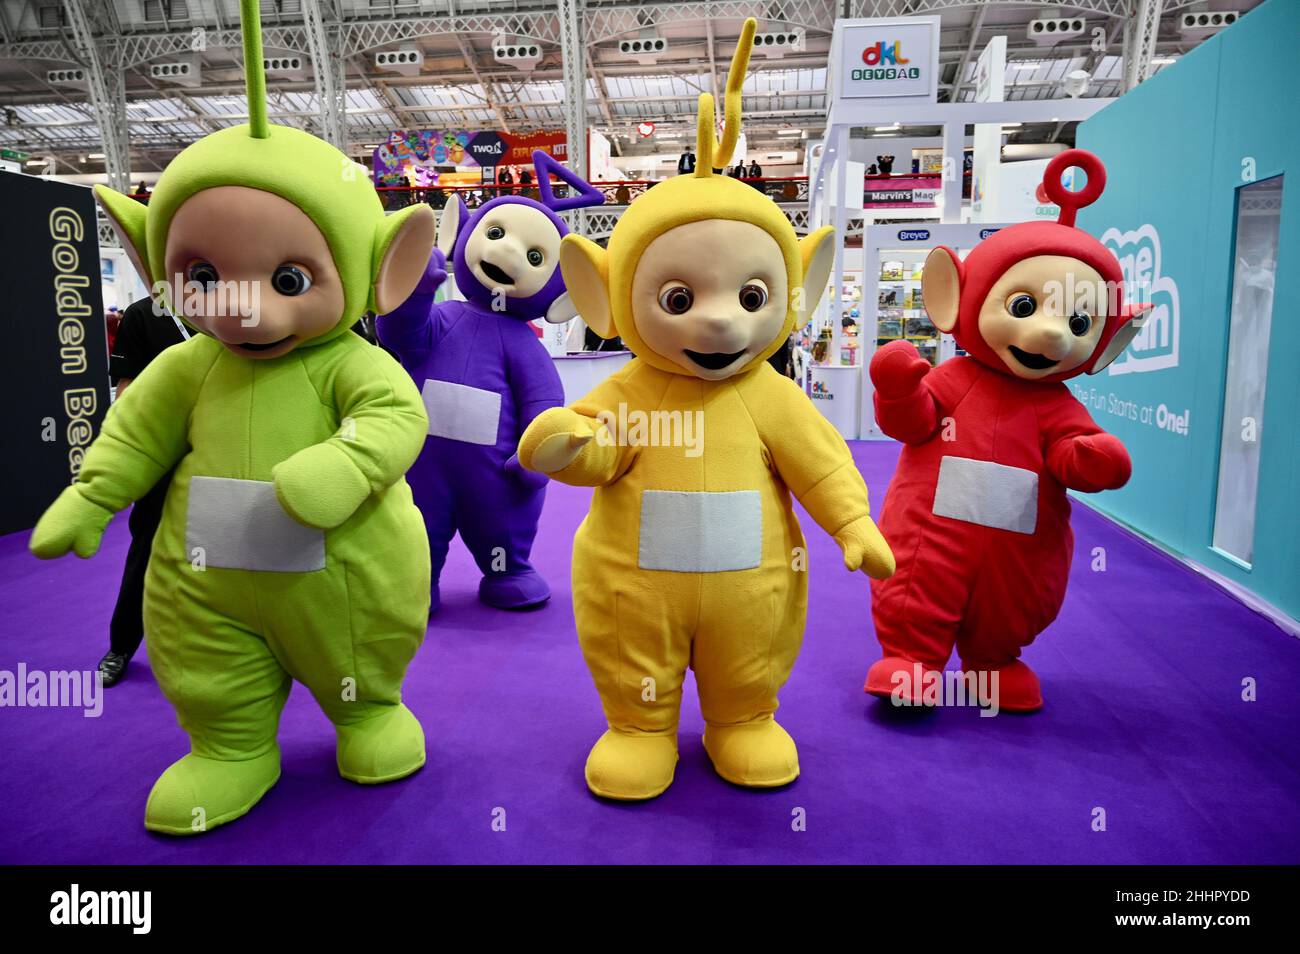 London, UK. Teletubbies, 68th Toy Fair held at Olympia Exhibition Centre the first following the COVID -19 Pandemic. The show themes are popular licenses, educational toys and family play. Credit: michael melia/Alamy Live News Stock Photo